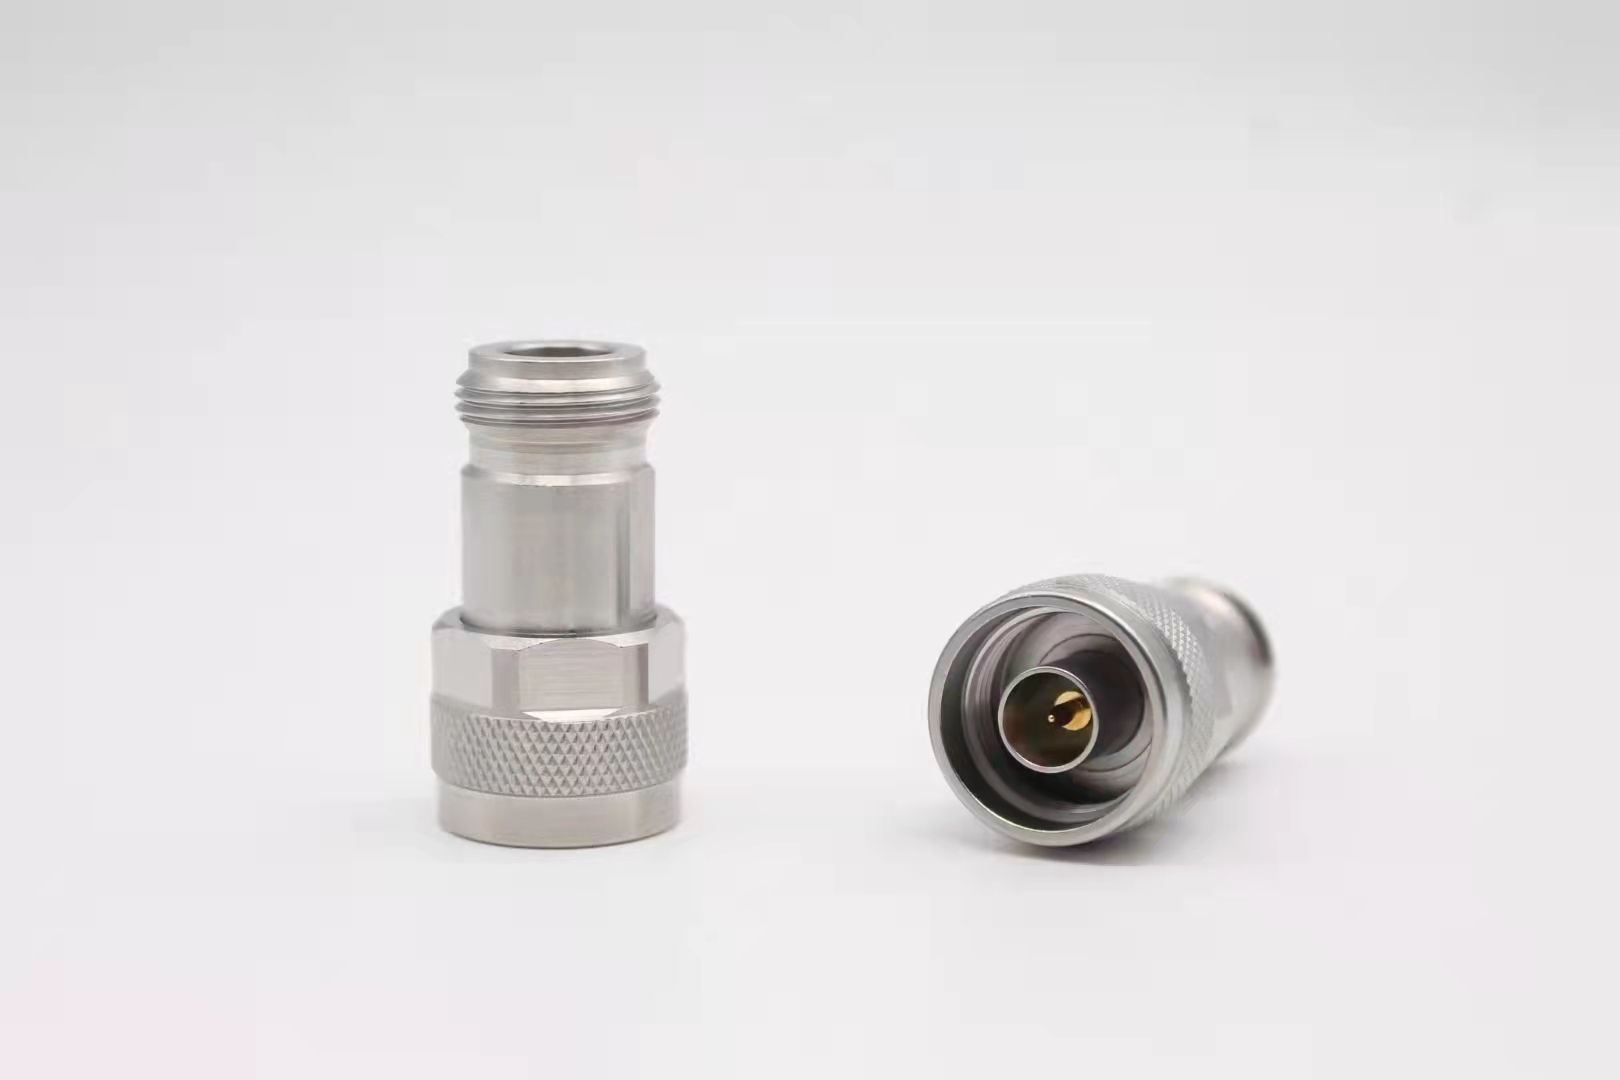 Precision stainless steel coaxial connector with n-shaped revolution nut